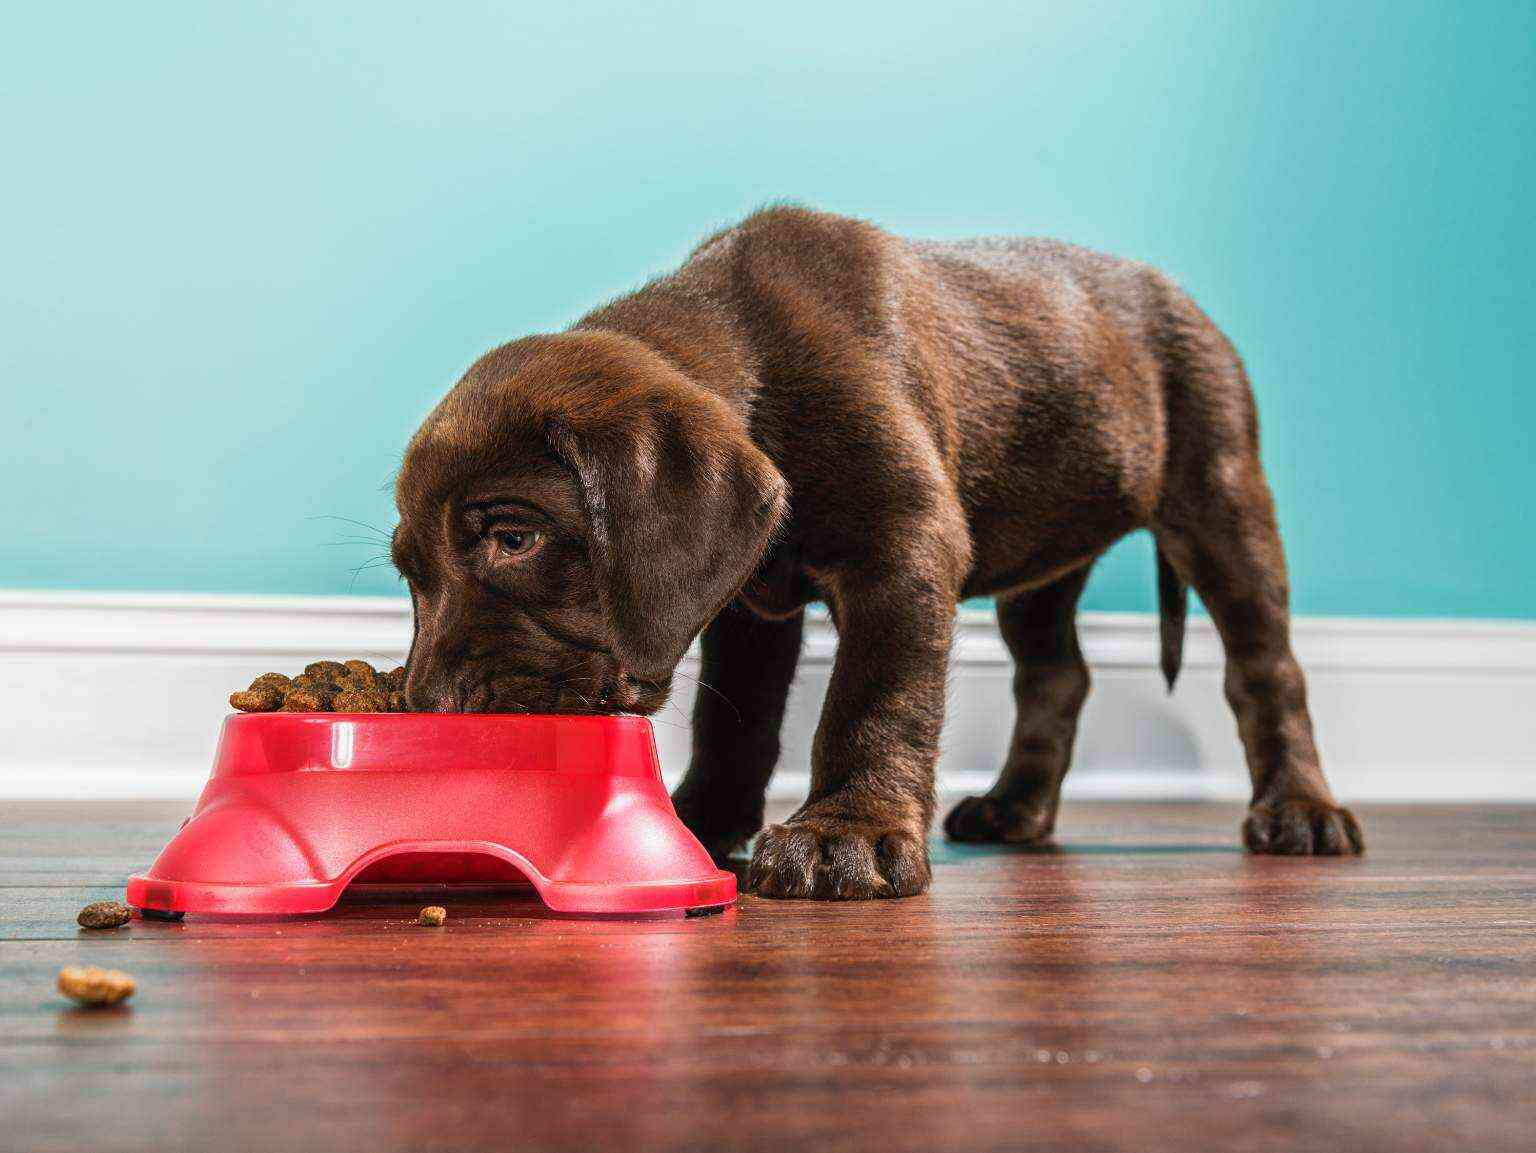 A puppy eating from a bowl of kibble